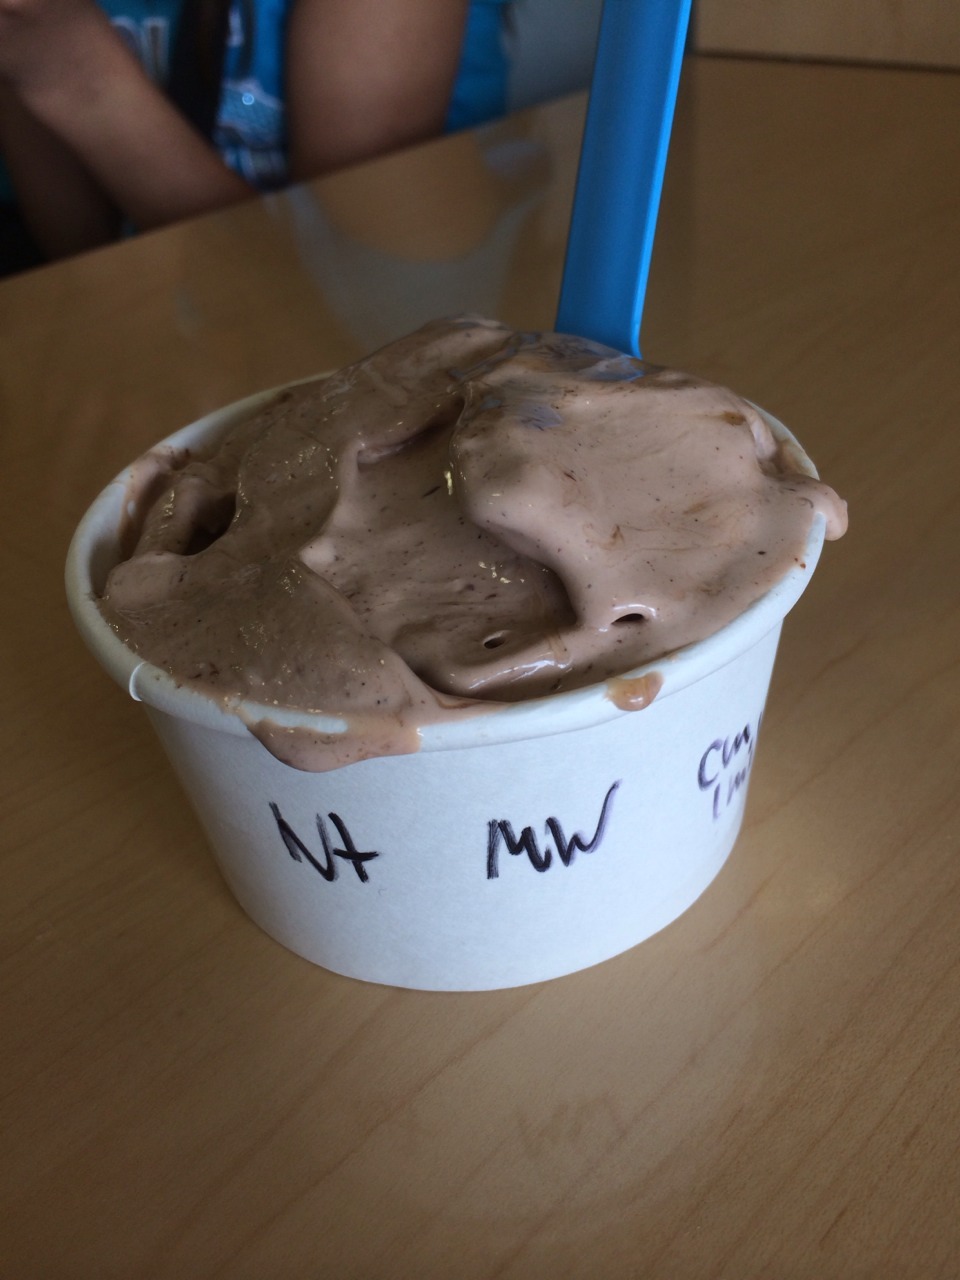 intellectual-tipster:  So by my house is an ice cream place called ChillN. It makes